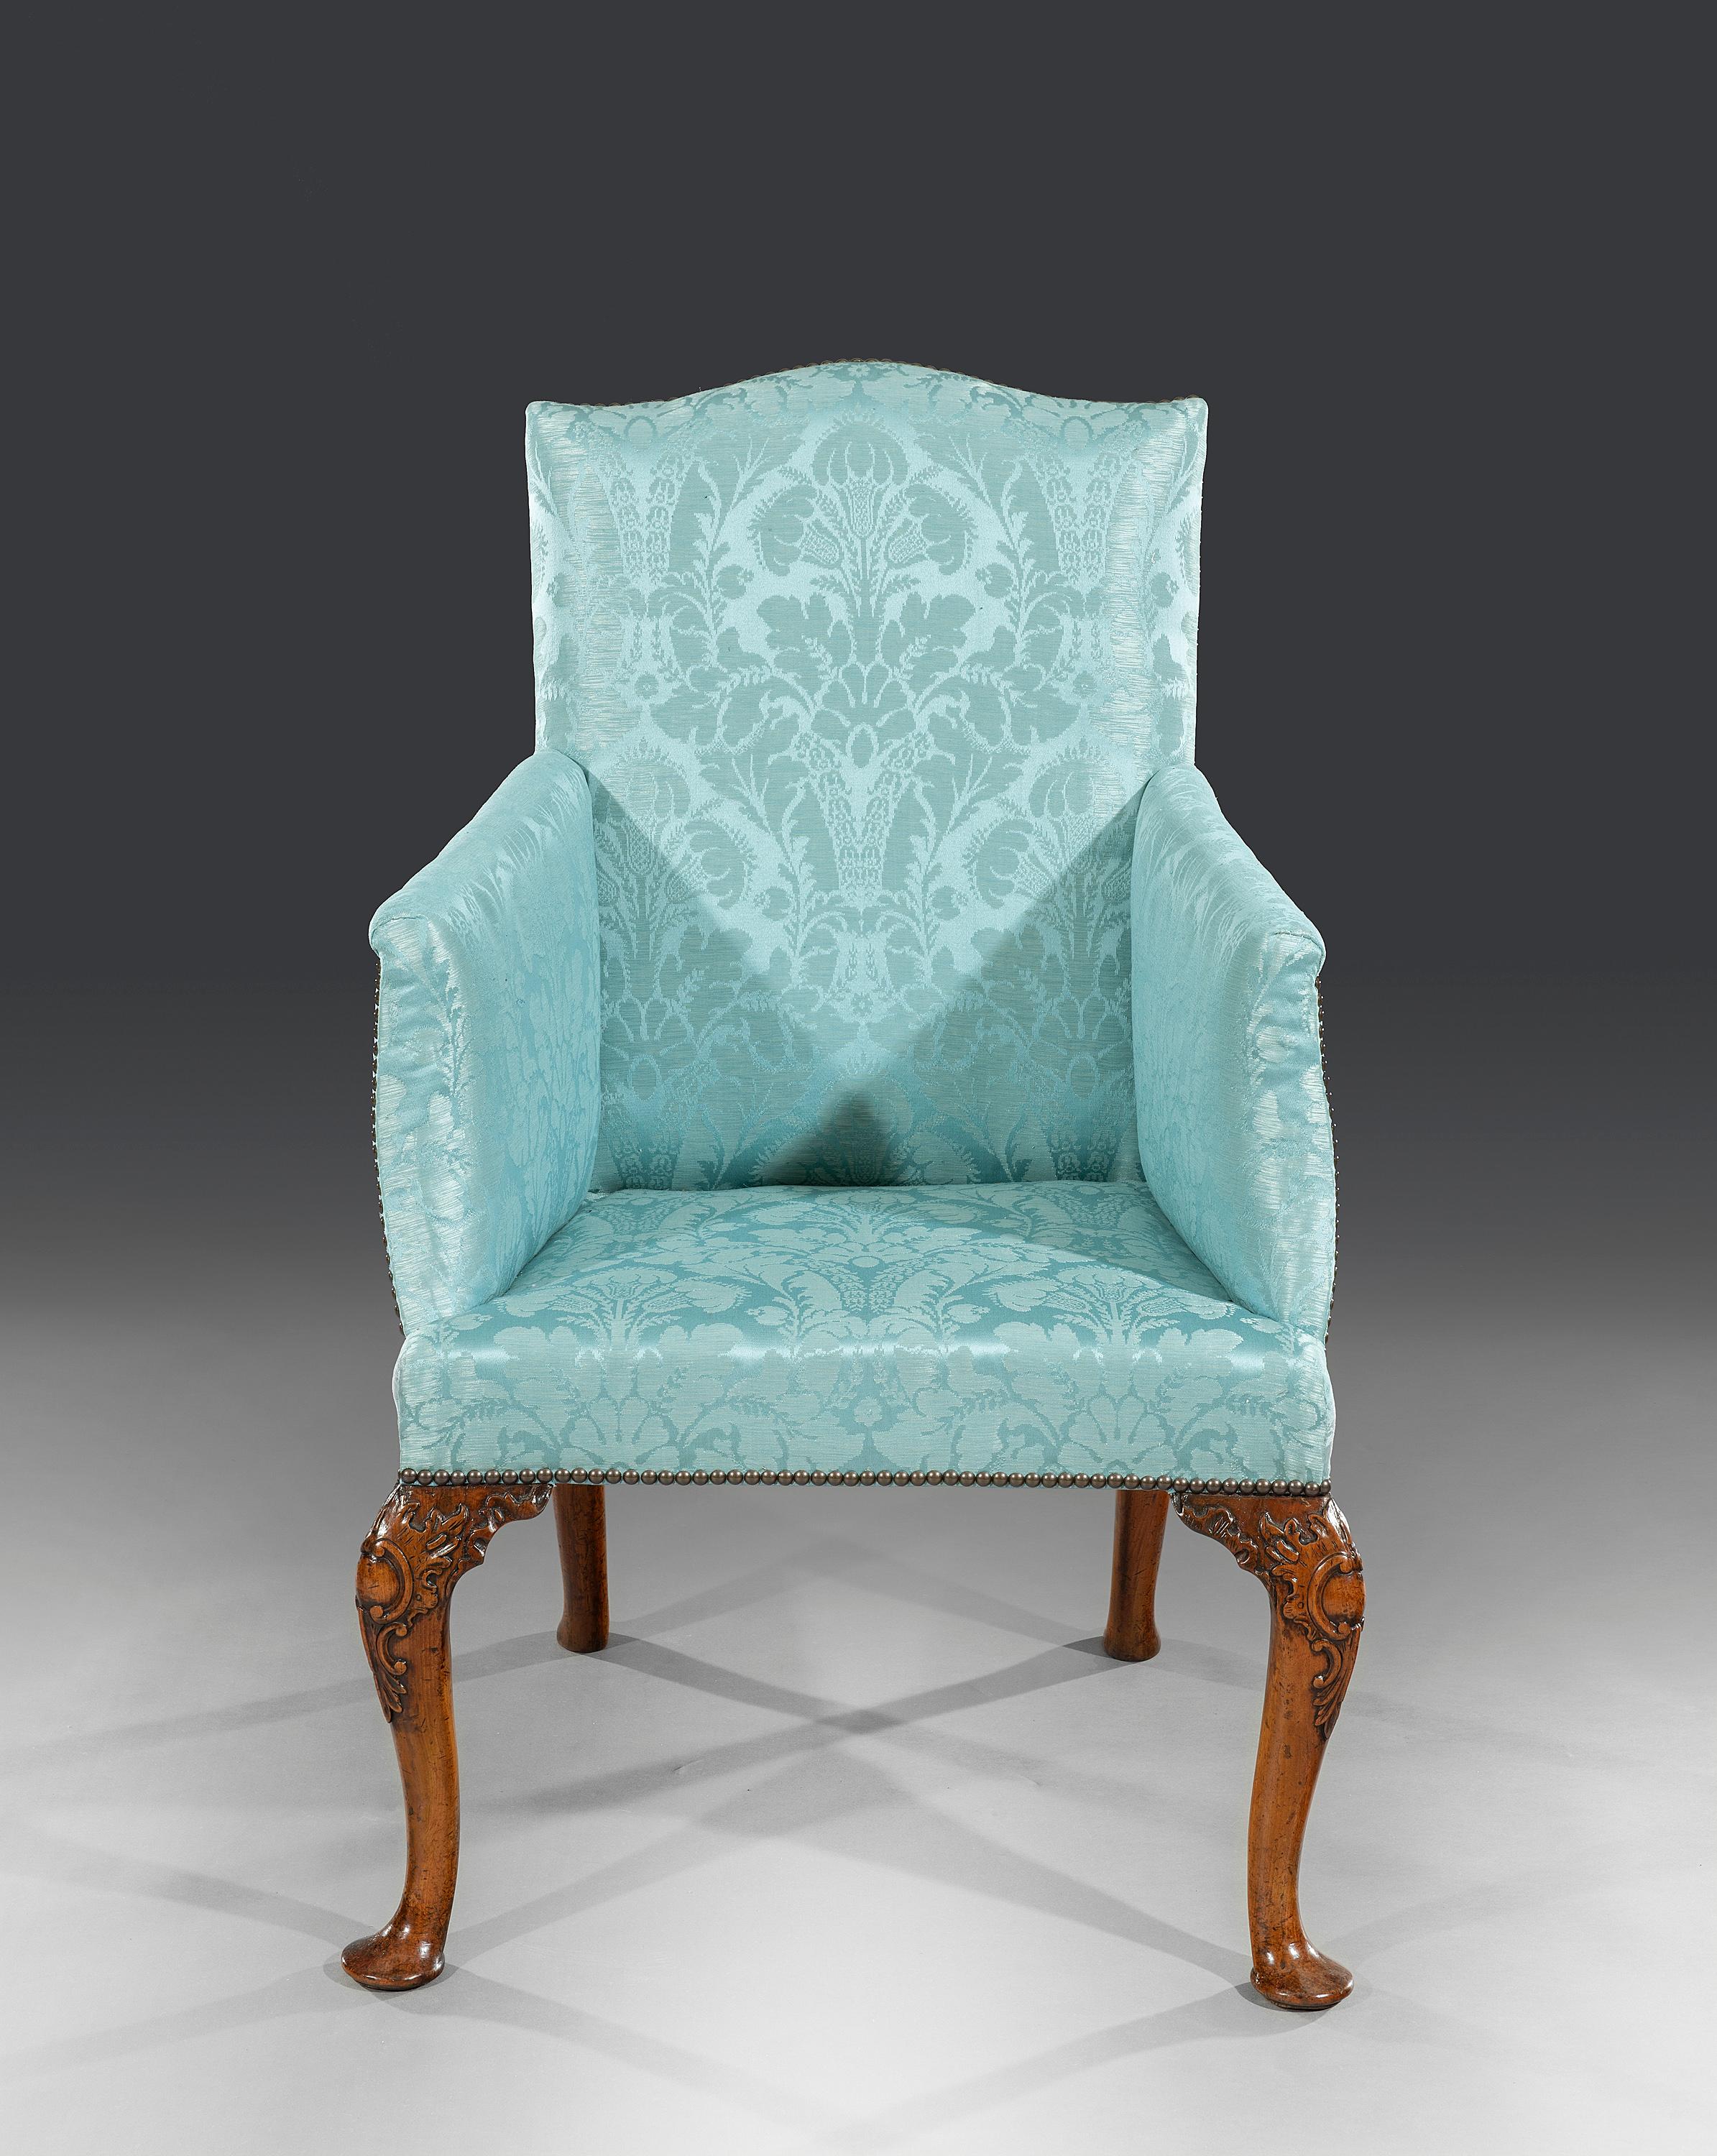 Rare 18th century period carved Queen Anne walnut library armchair of elegant proportions


Current condition:
We do have images of the frame when we restored the chair and can confirm that the legs are original as well as the frame. Some minor